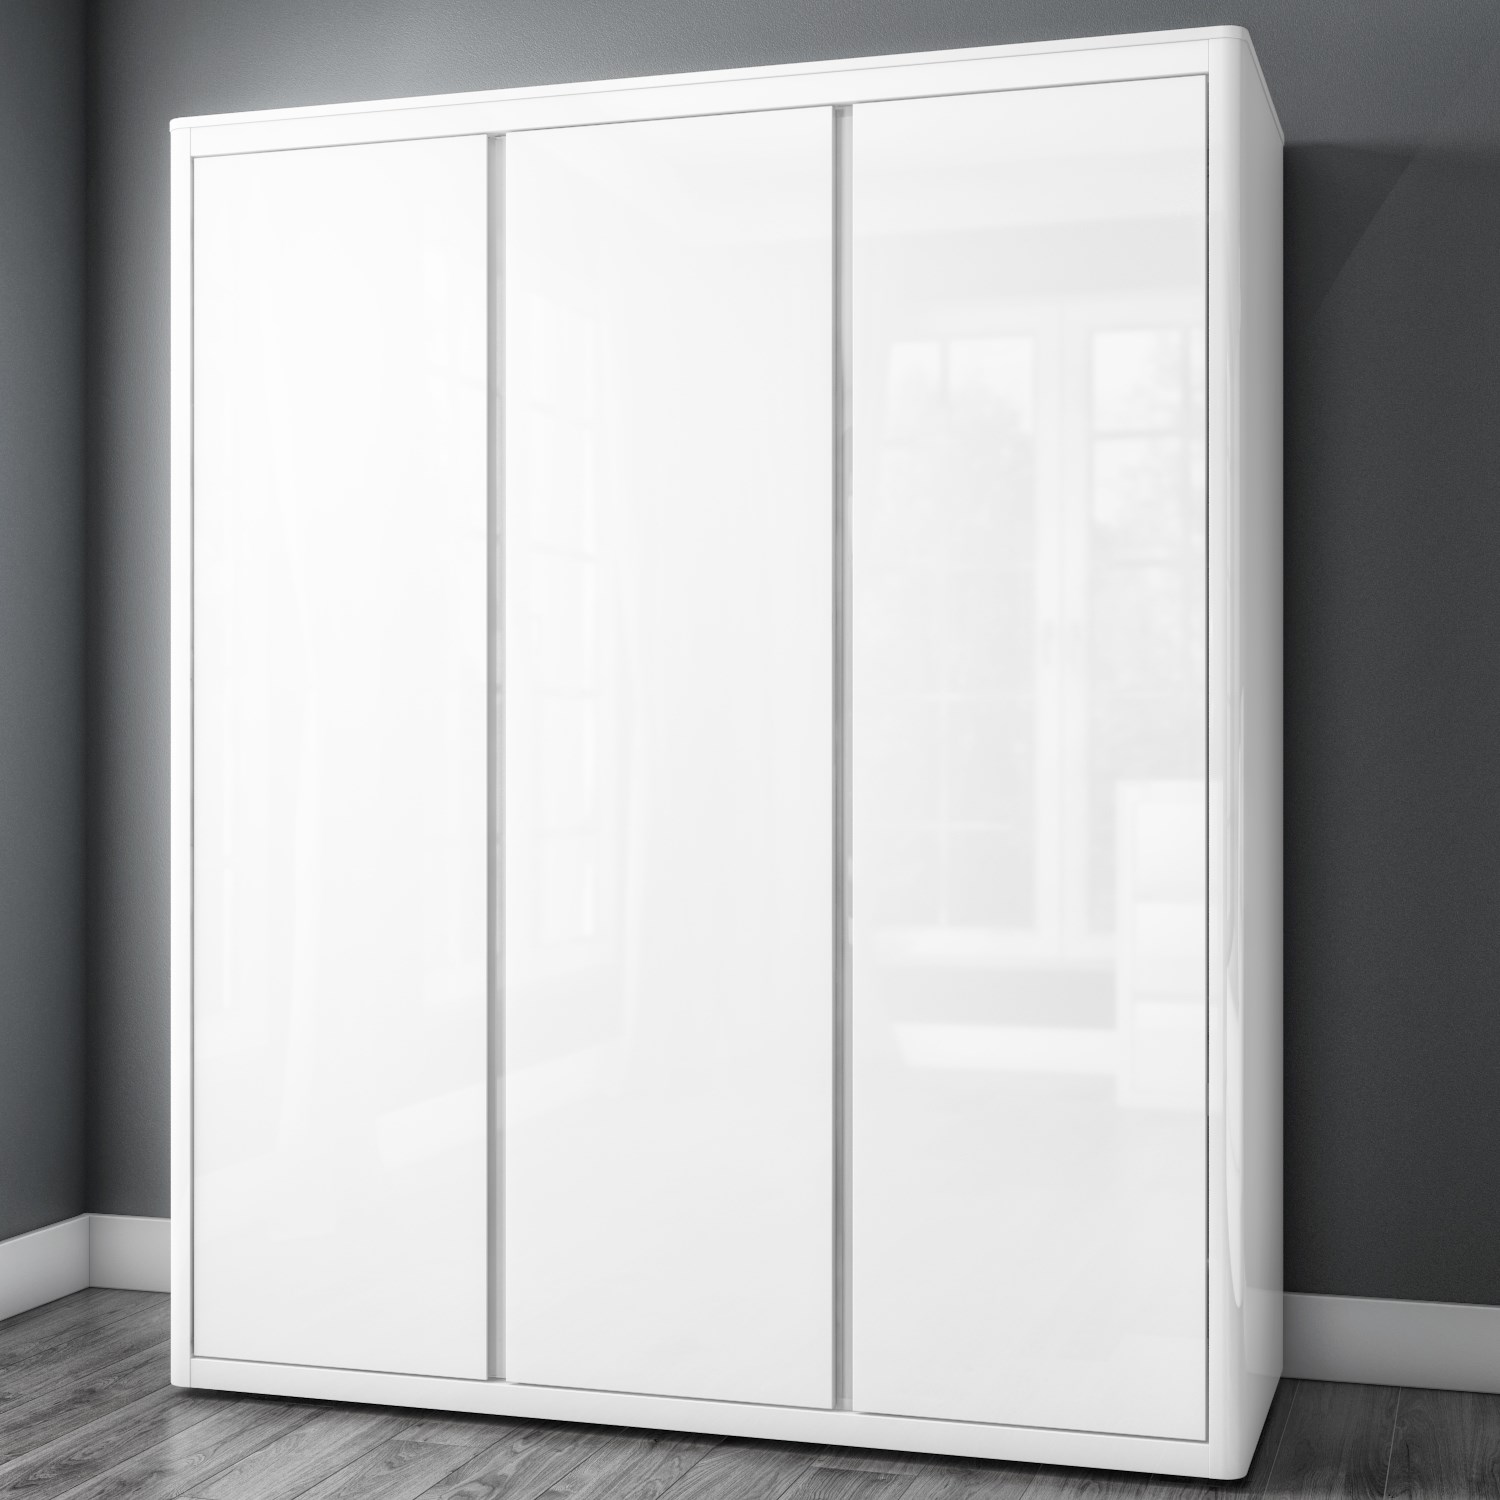 Types of wardrobes: buy wardrobes with no doors